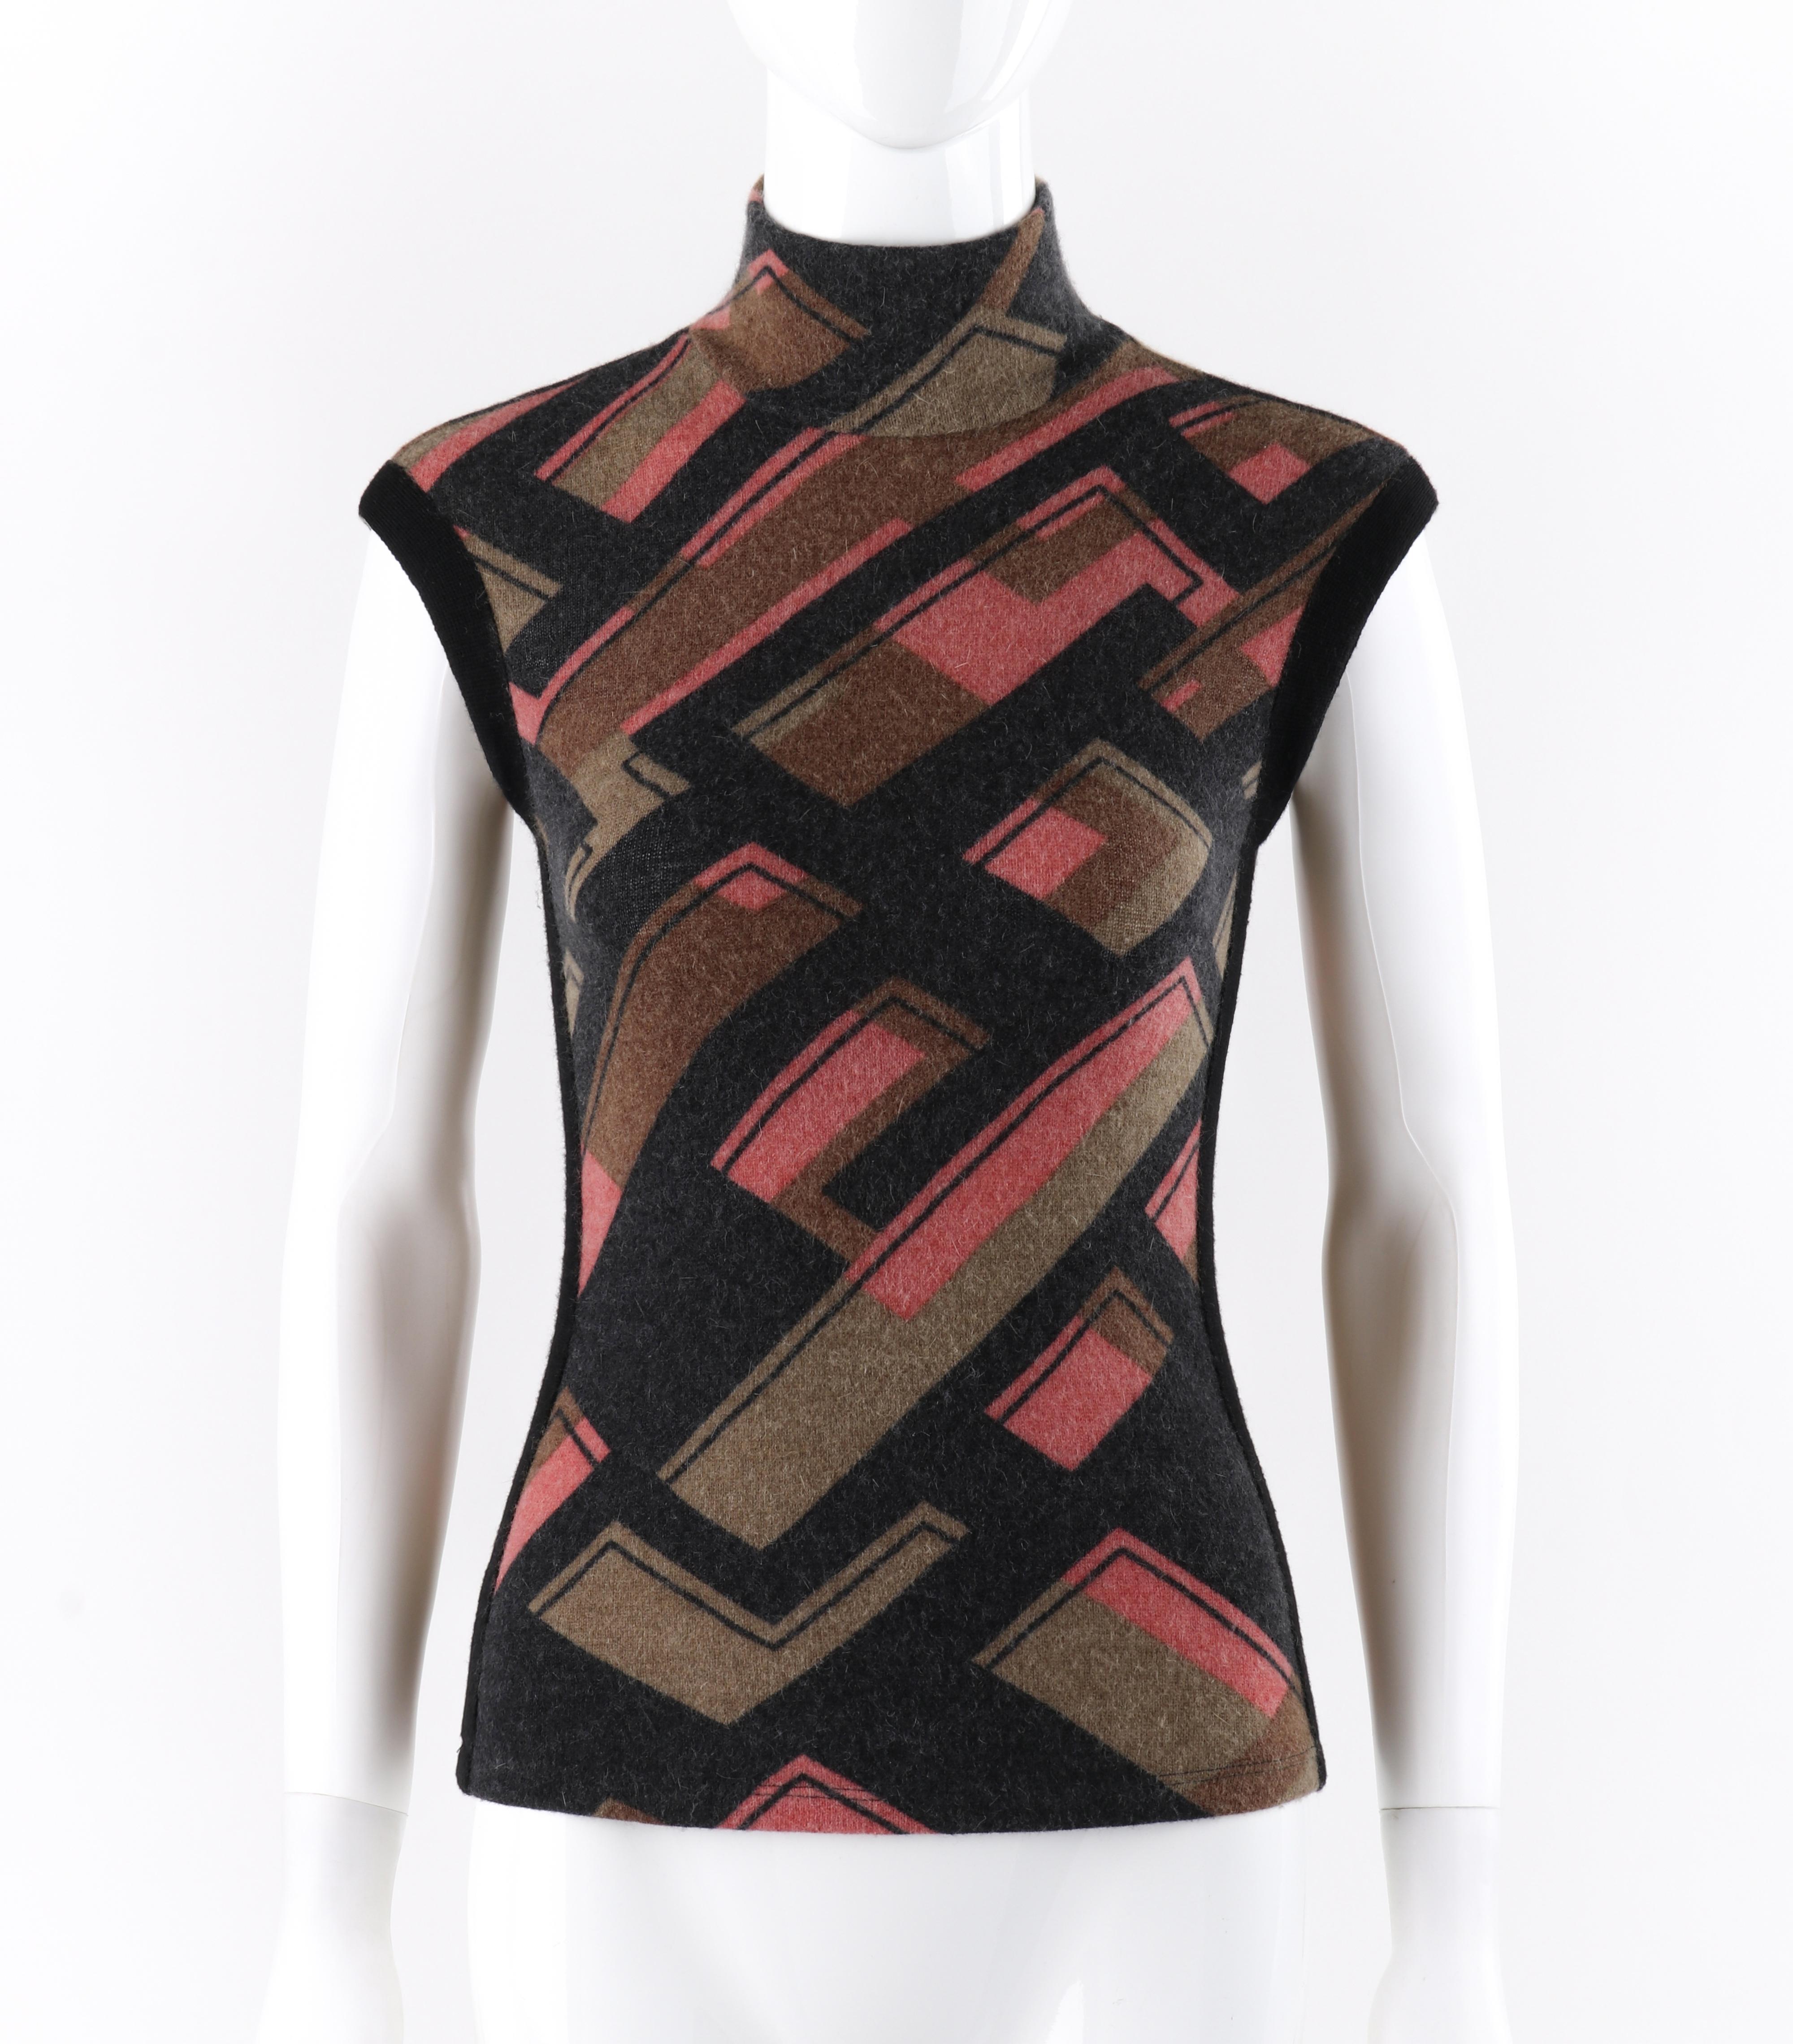 ALEXANDER McQUEEN A/W 1995 “Highland Rape” Multicolor Pattern Sleeveless Sweater
 
Brand / Manufacturer: Alexander McQueen
Collection: A/W 1995
Designer: Alexander McQueen
Style:  Sleeveless bottleneck sweater
Color(s): Shades of brown, gray, black,